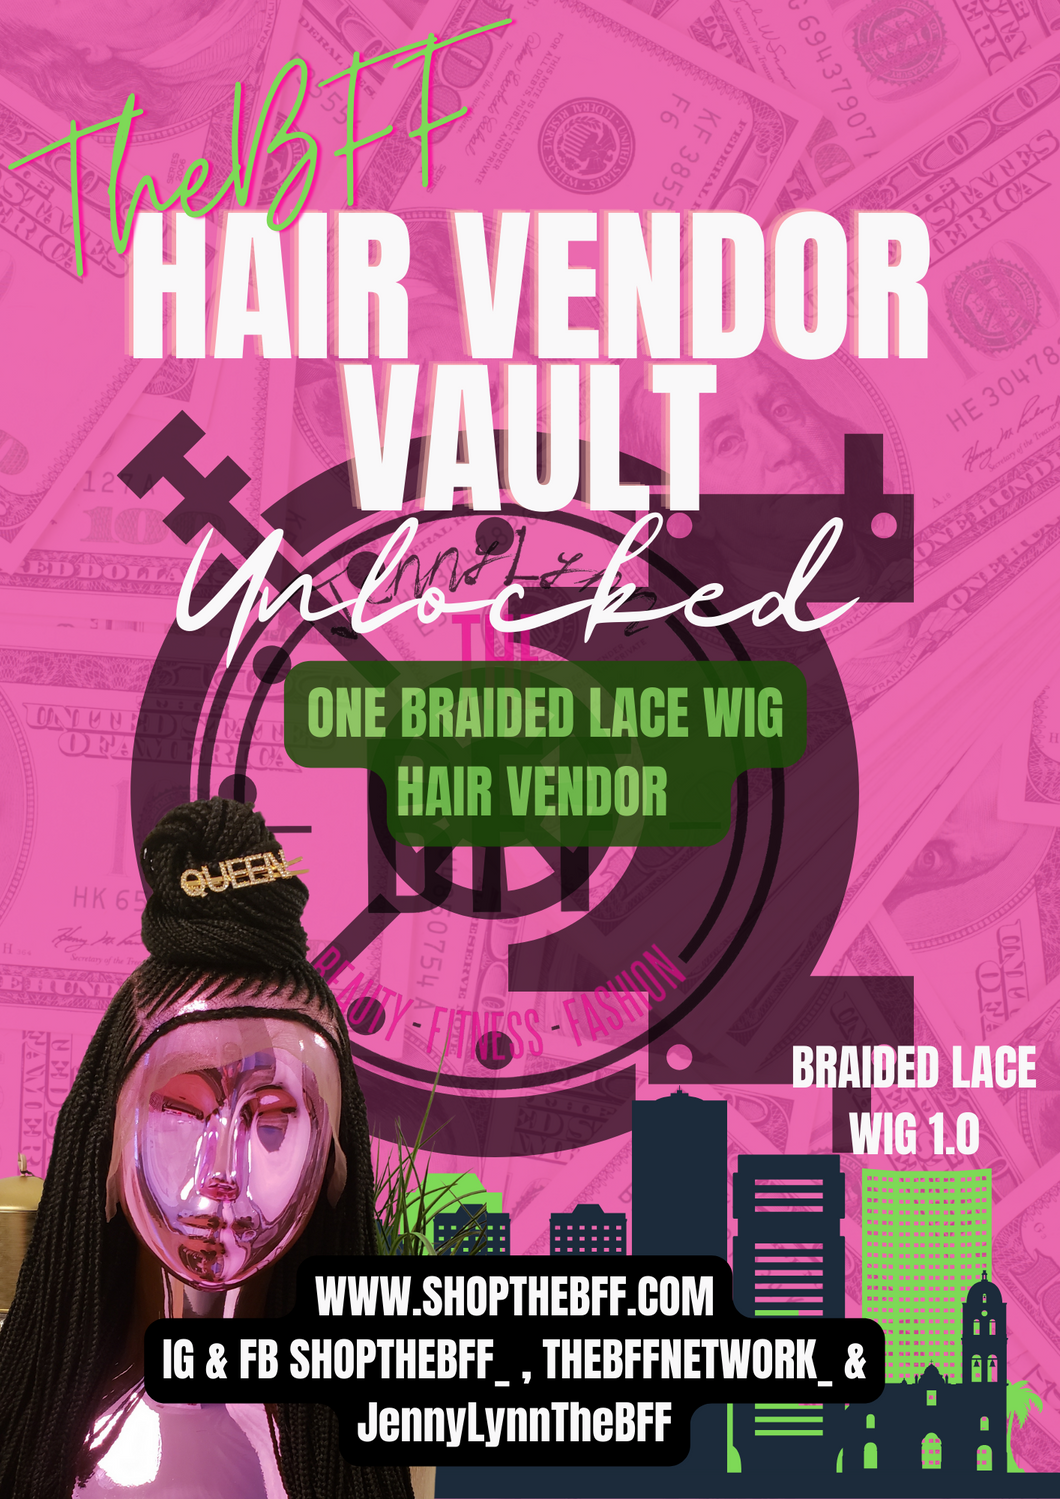 #6 TheBFF Braided Lace Wig Vendor Vault 1.0 Edition